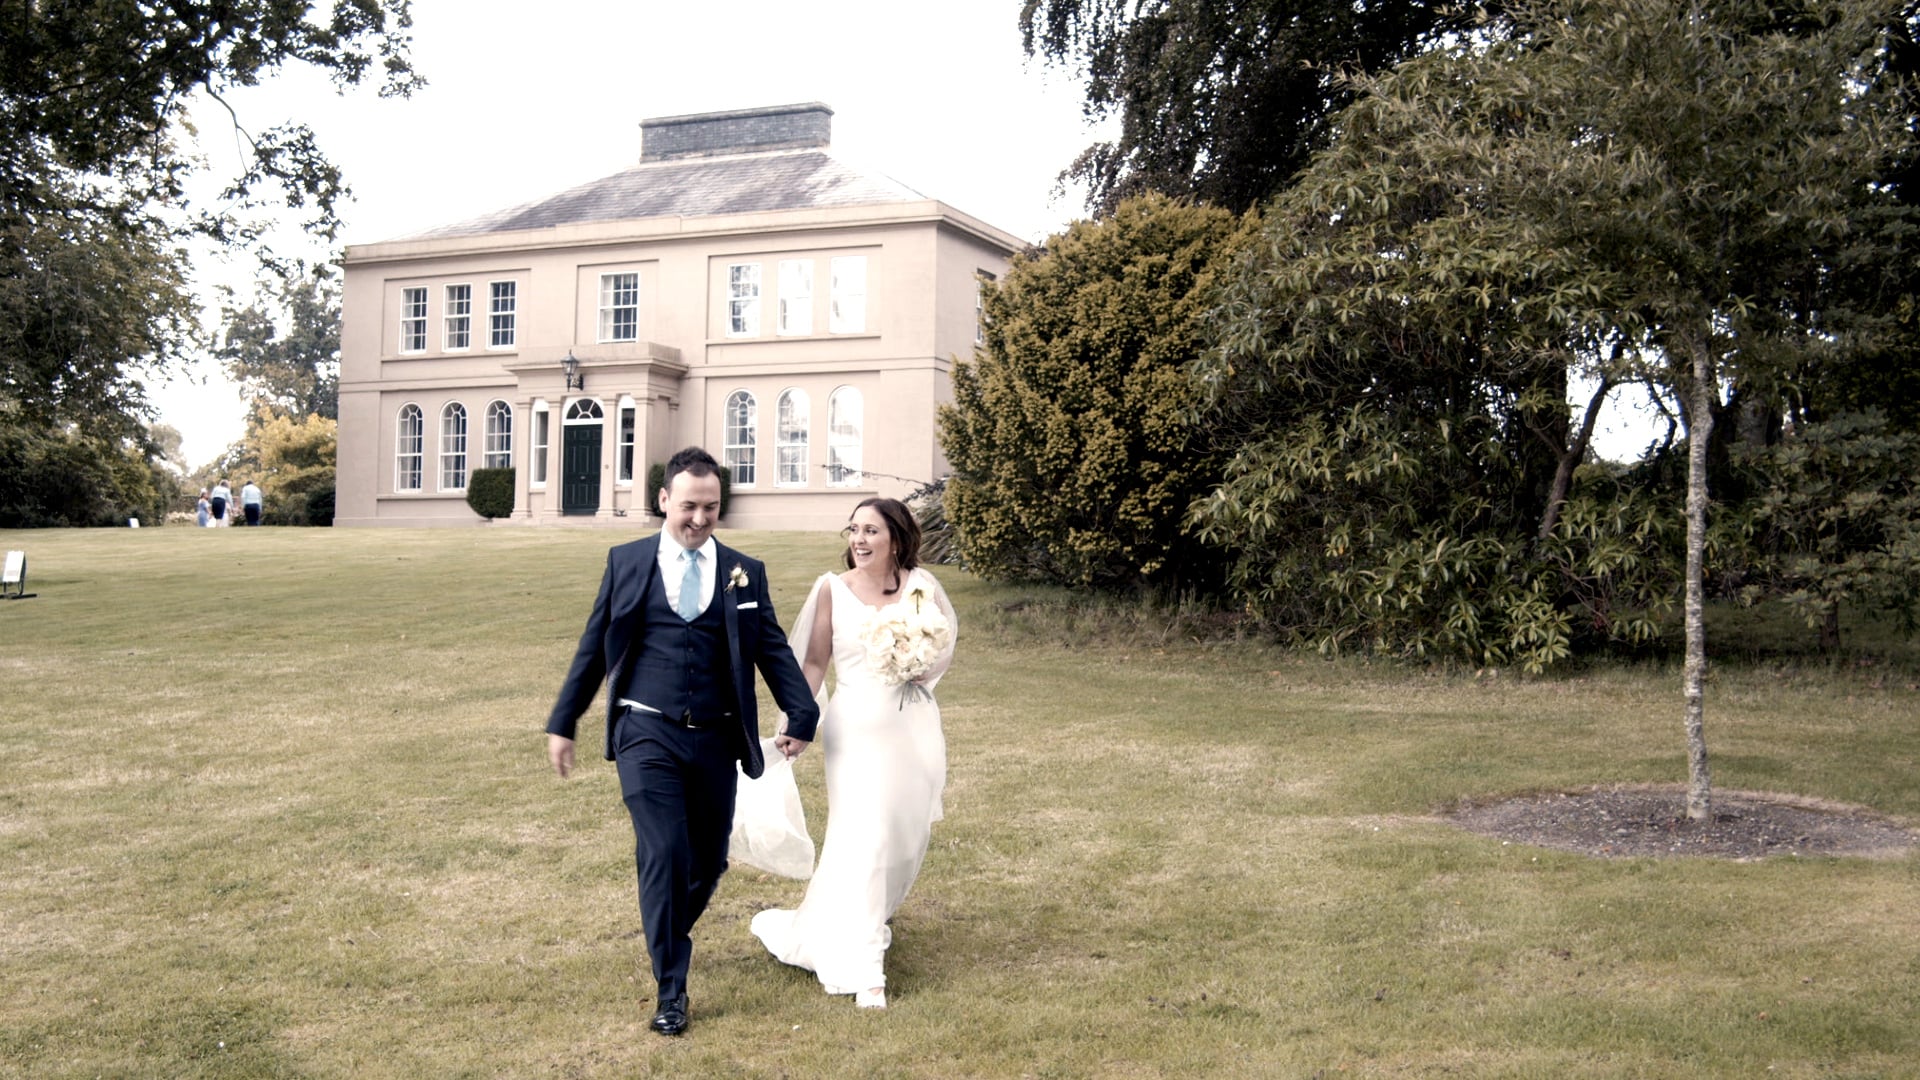 Claire & Damien | TULLYVEERY HOUSE